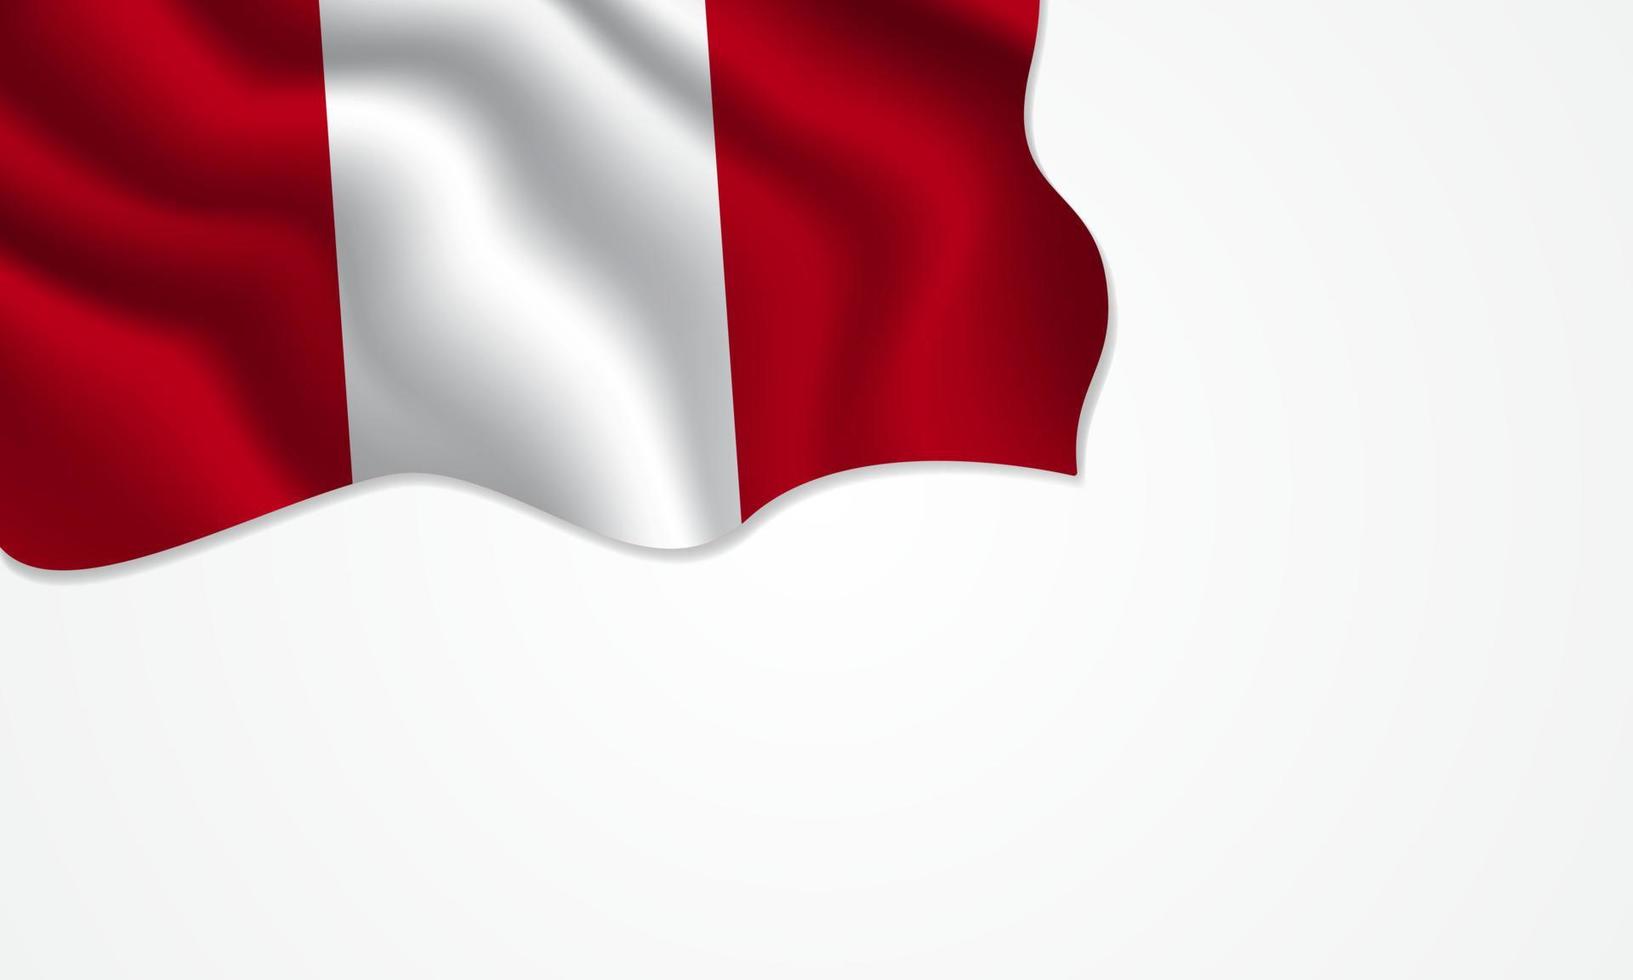 Peru flag waving illustration with copy space on isolated background vector